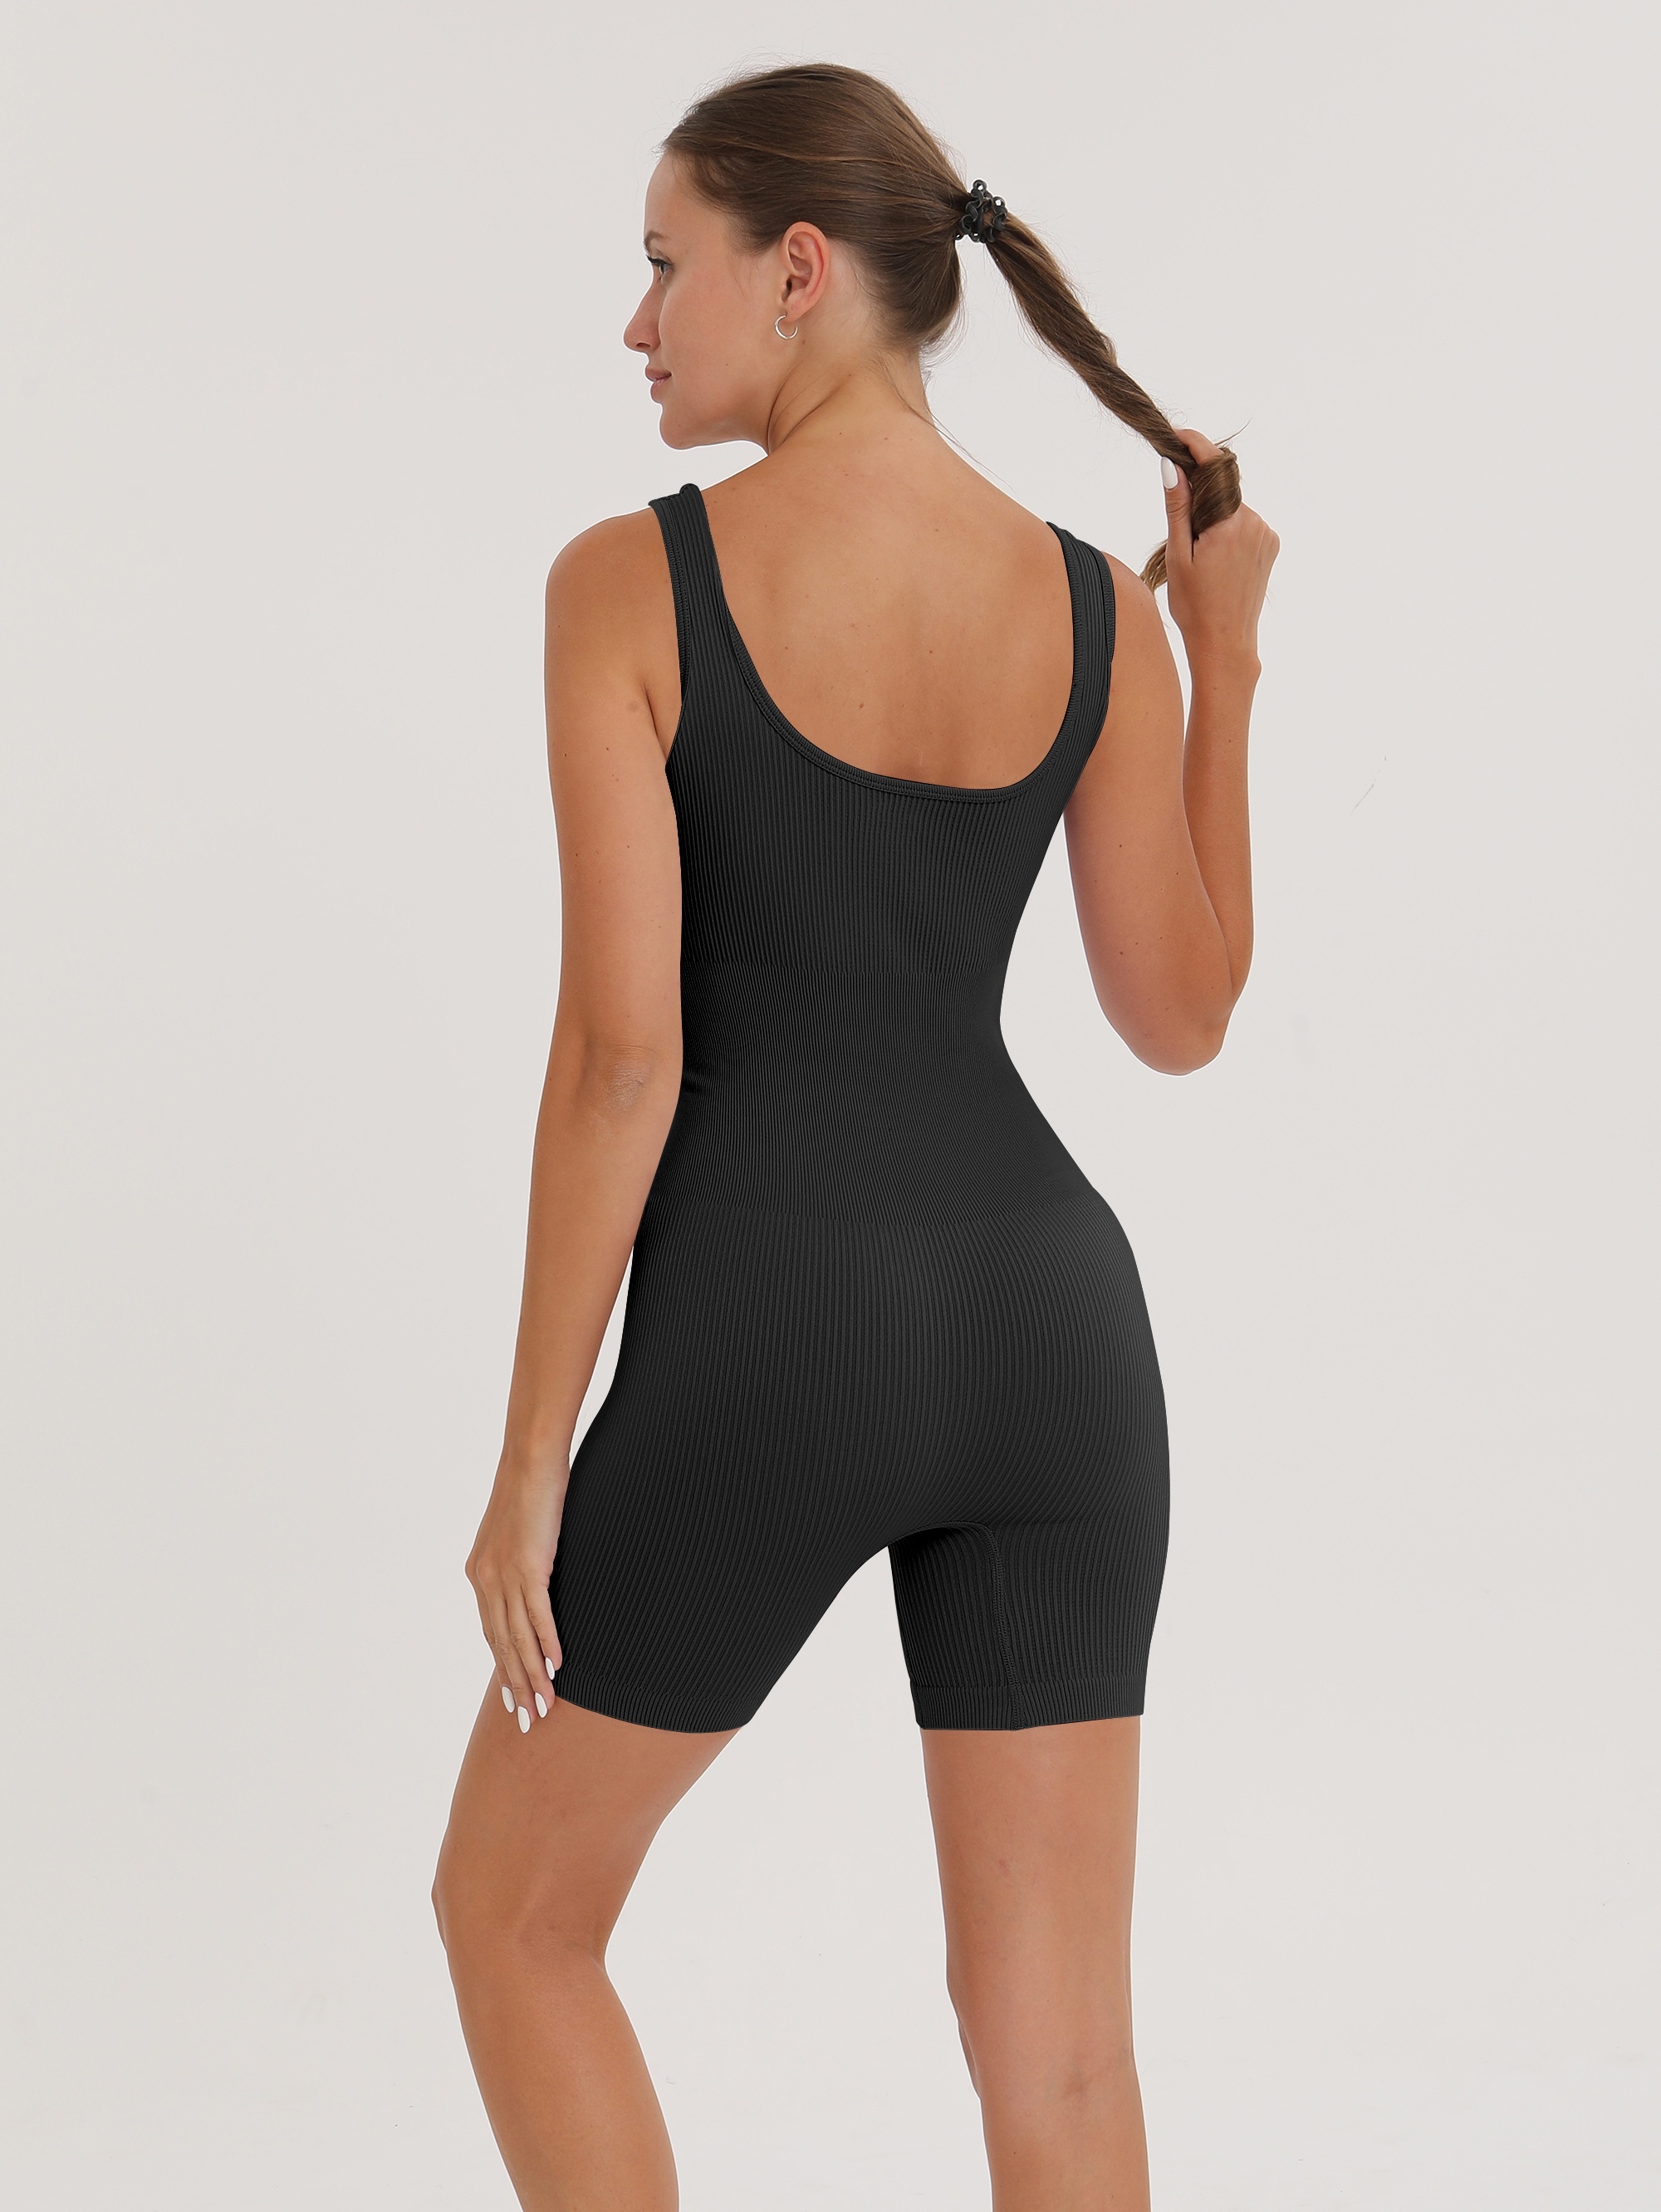 Bodysuit For Women Tummy Control Yoga Rompers Workout Ribbed Square Neck  Sleeveless Sport Romper Jumpsuits For Women Summer Black XL 